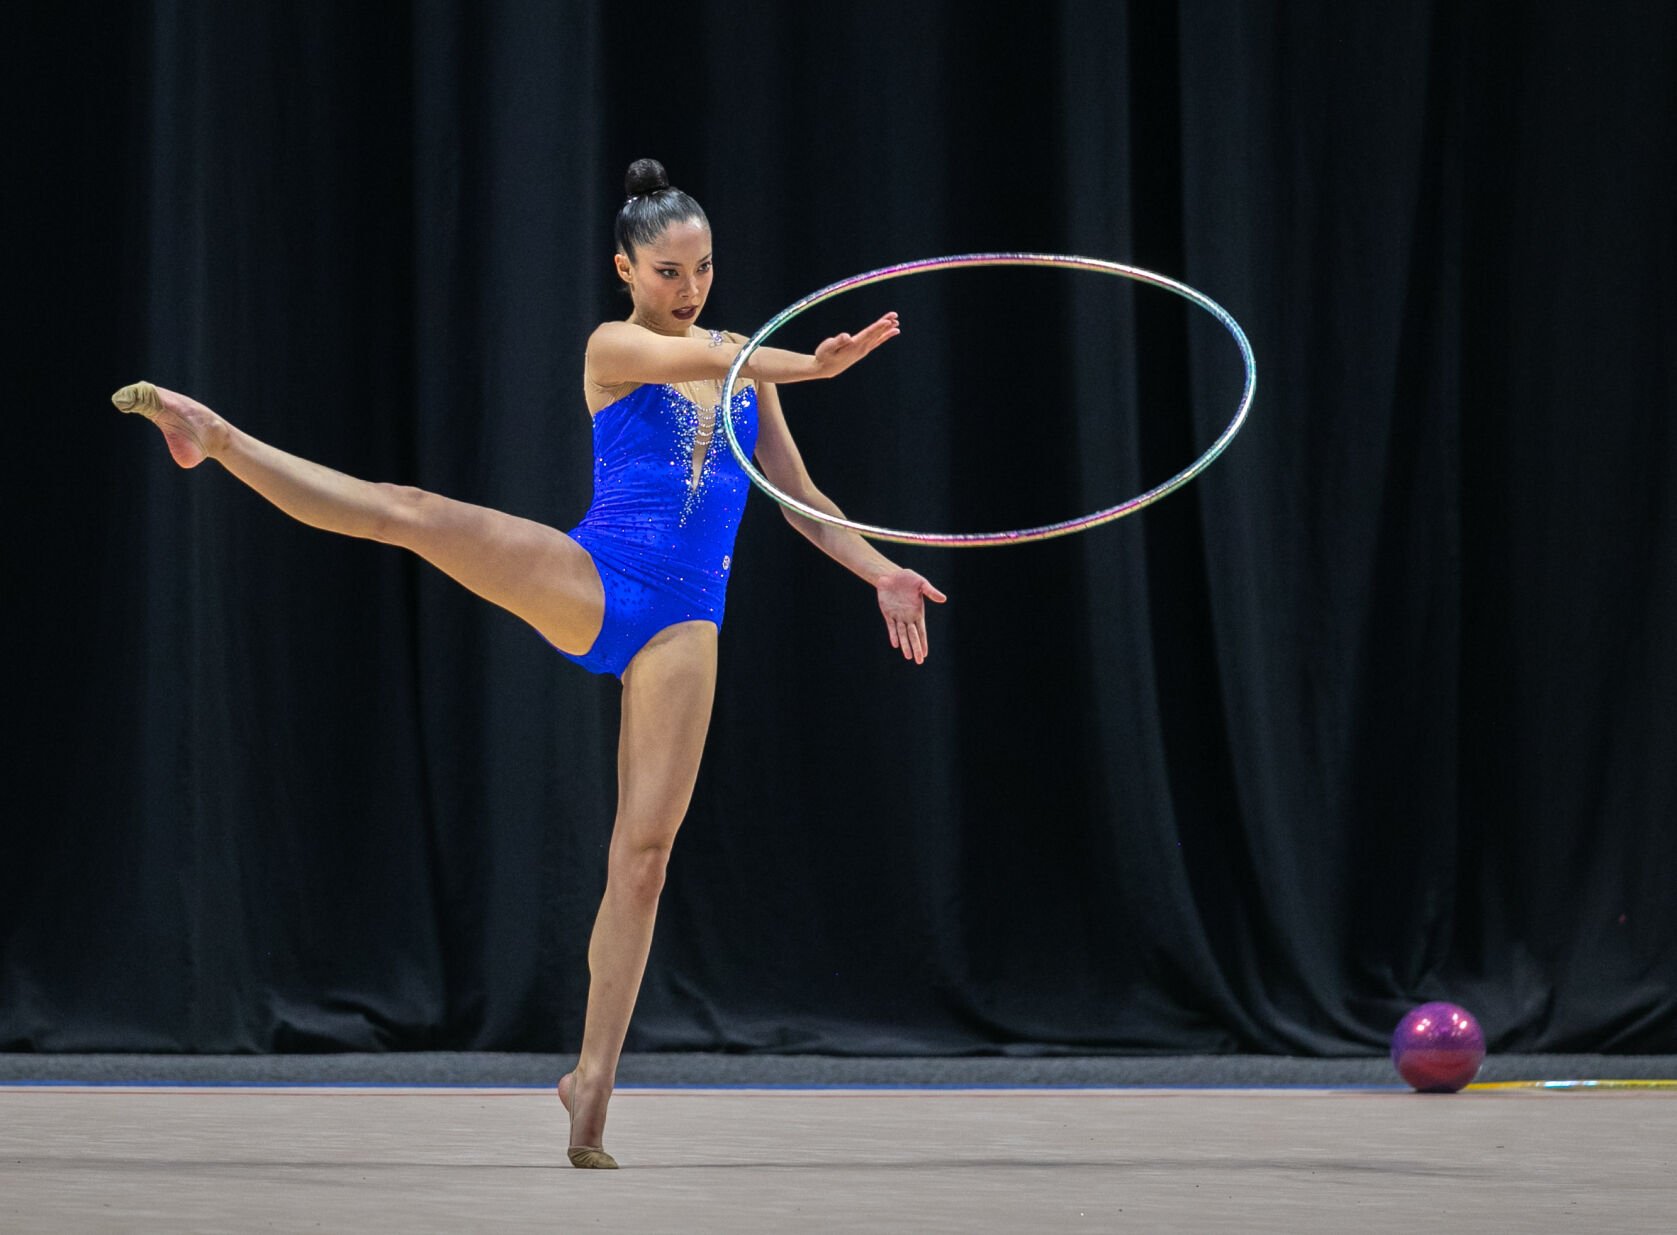 300 Asian Rhythmic Gymnastic Images, Stock Photos, 3D objects, & Vectors |  Shutterstock